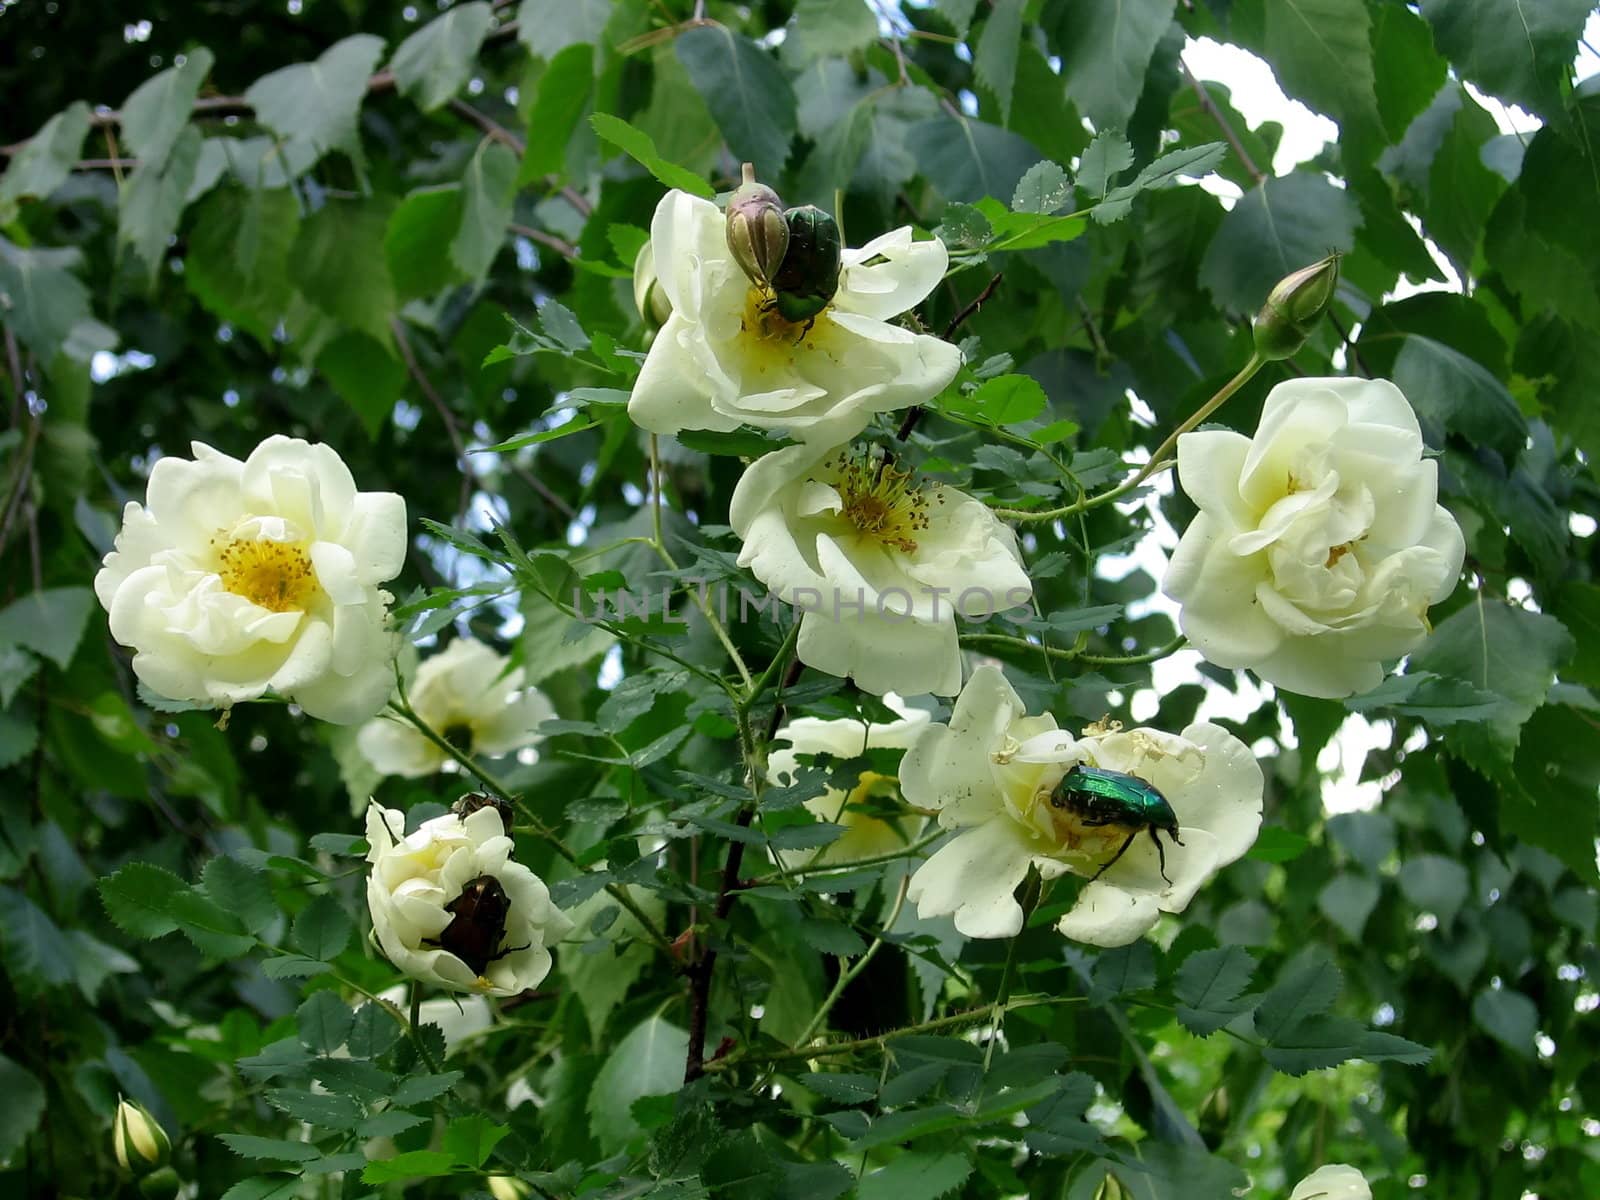 The blossoming dog-rose with beetles on the flowers